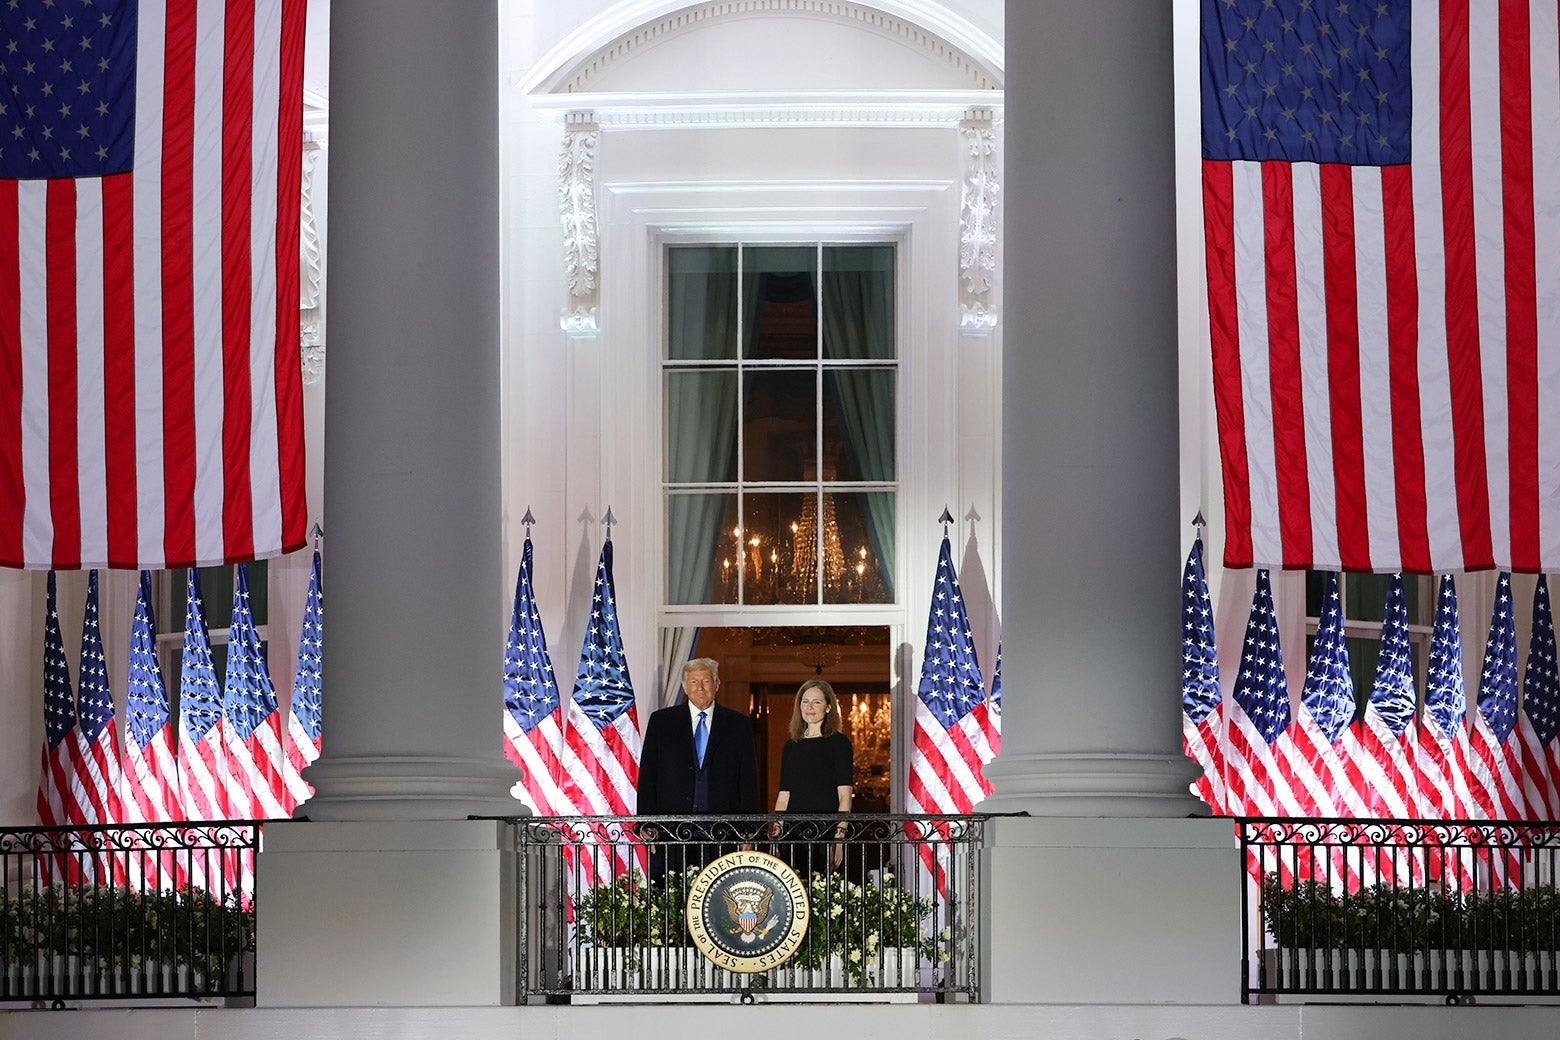 Trump and Barrett stand on a balcony overlooking the South Lawn, with American flags all around them